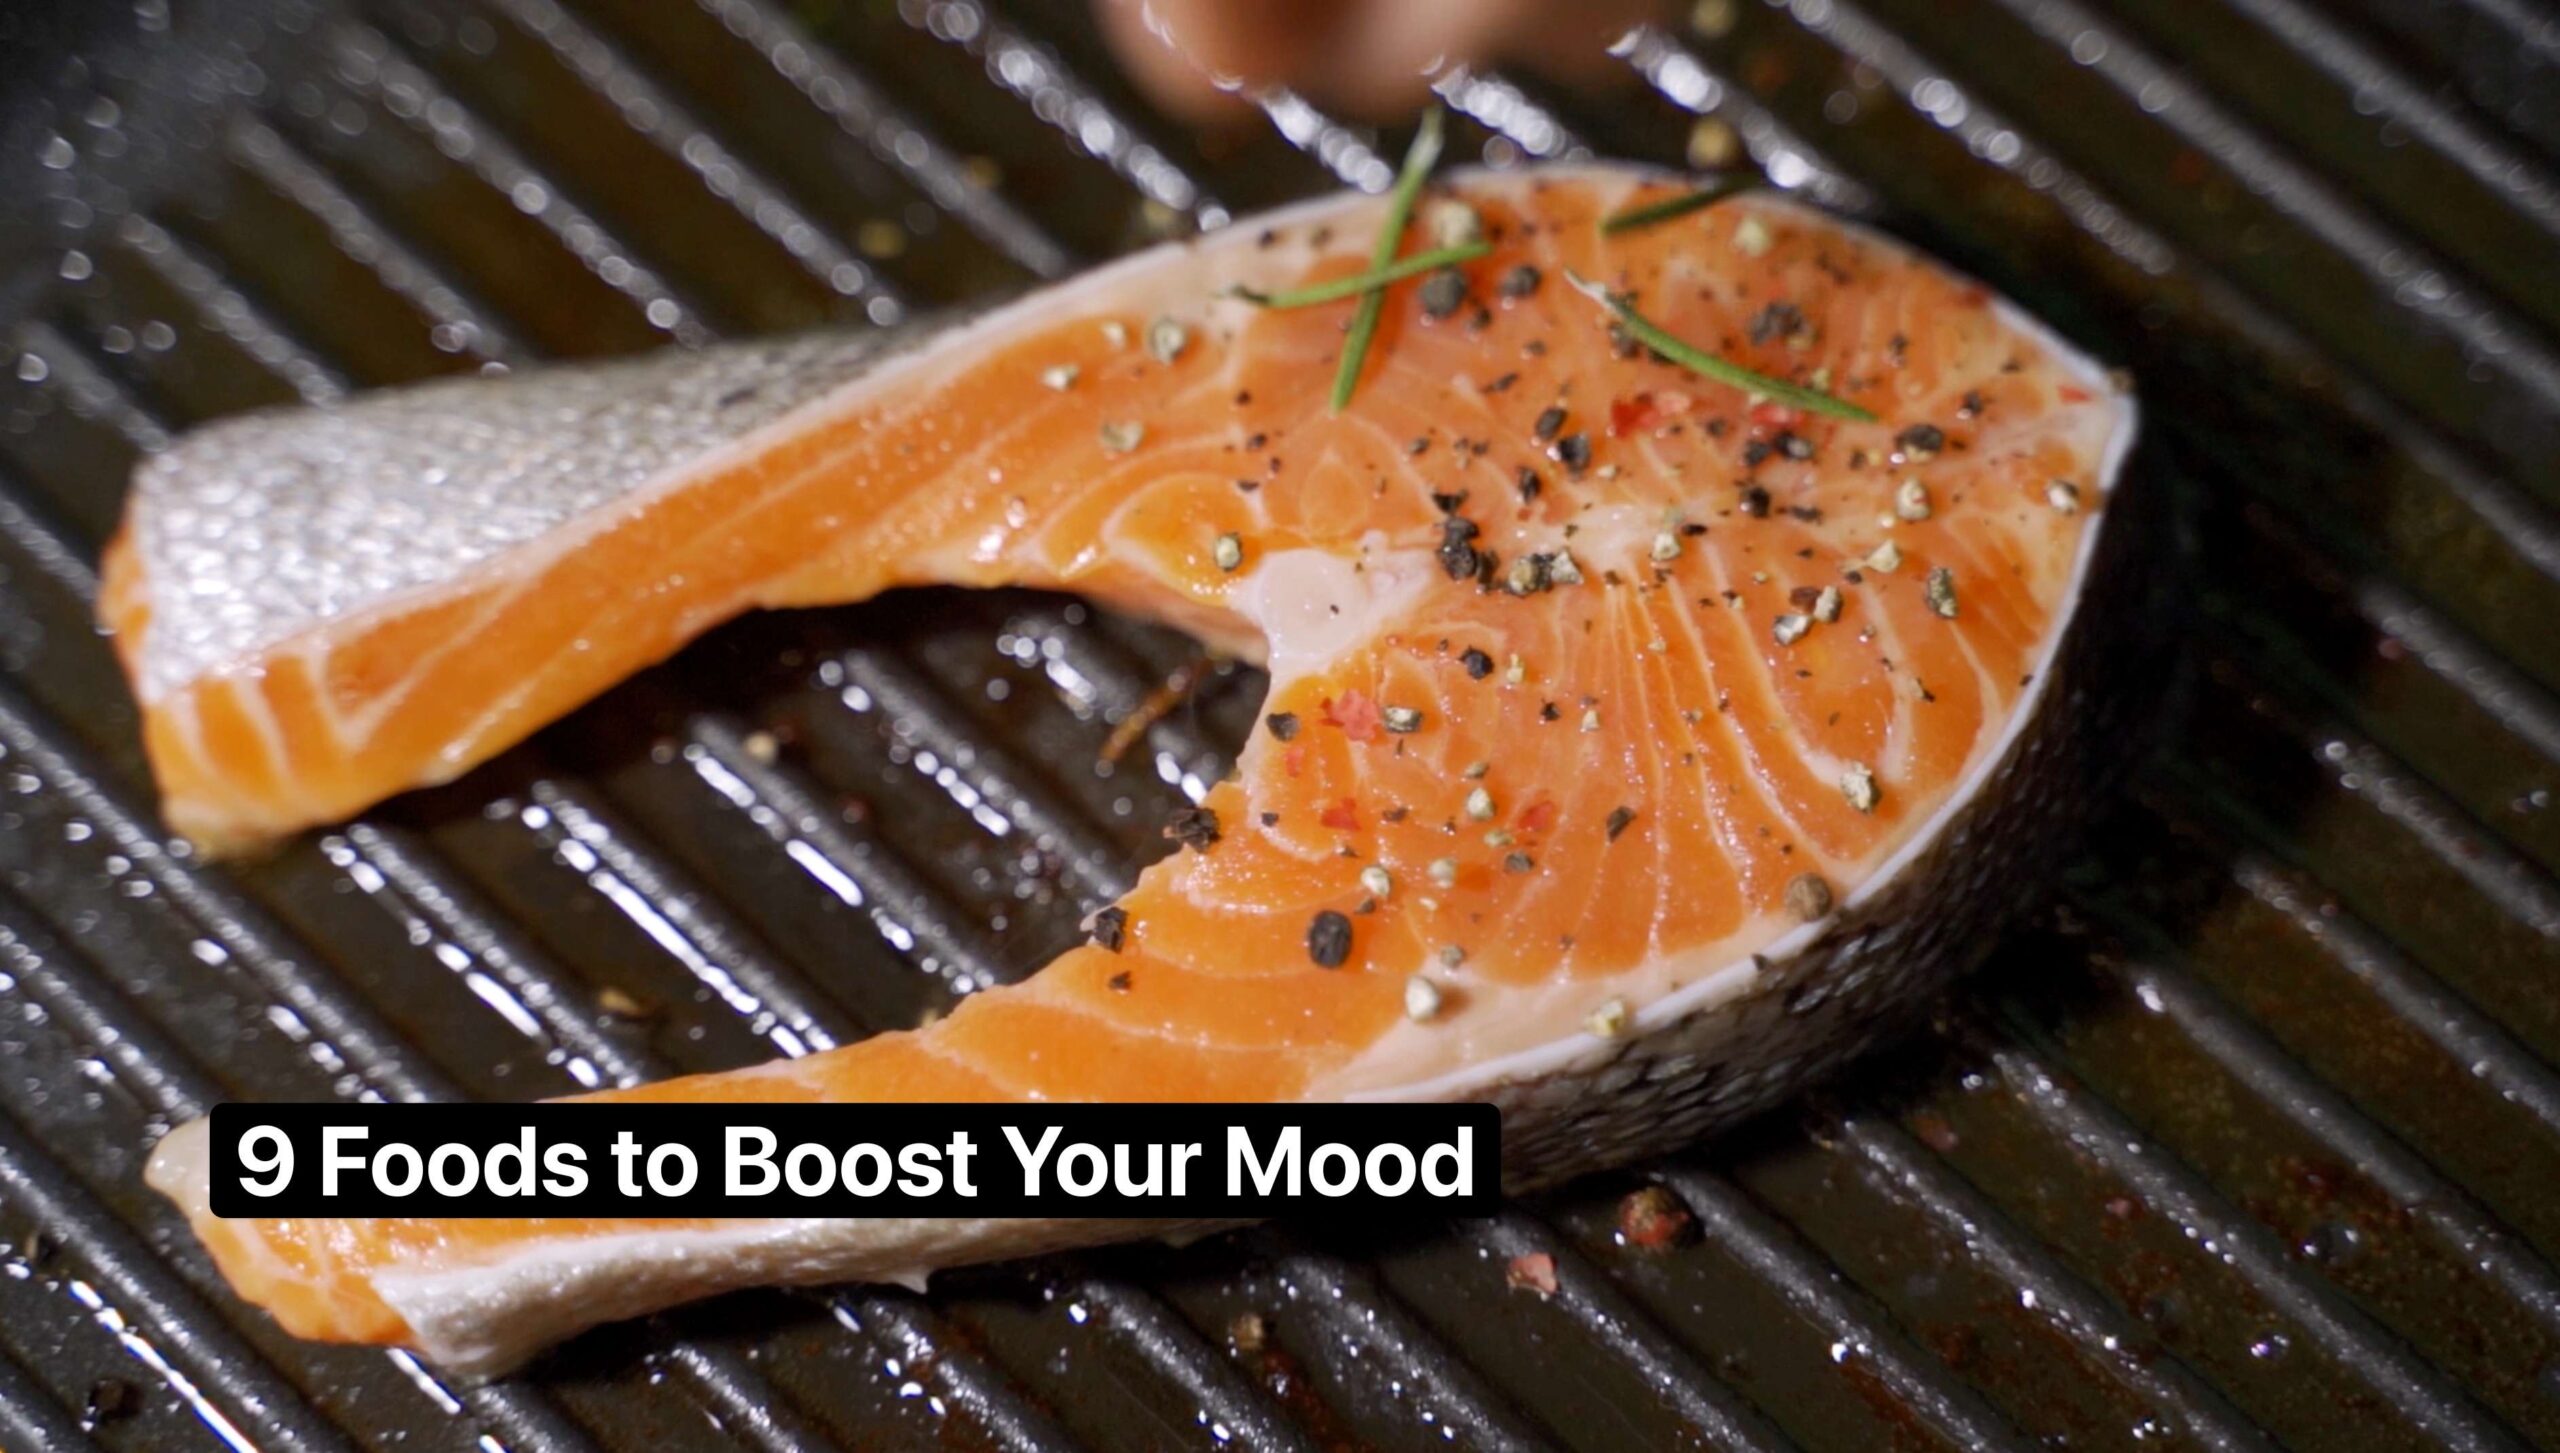 9 Foods to Boost your Mood image